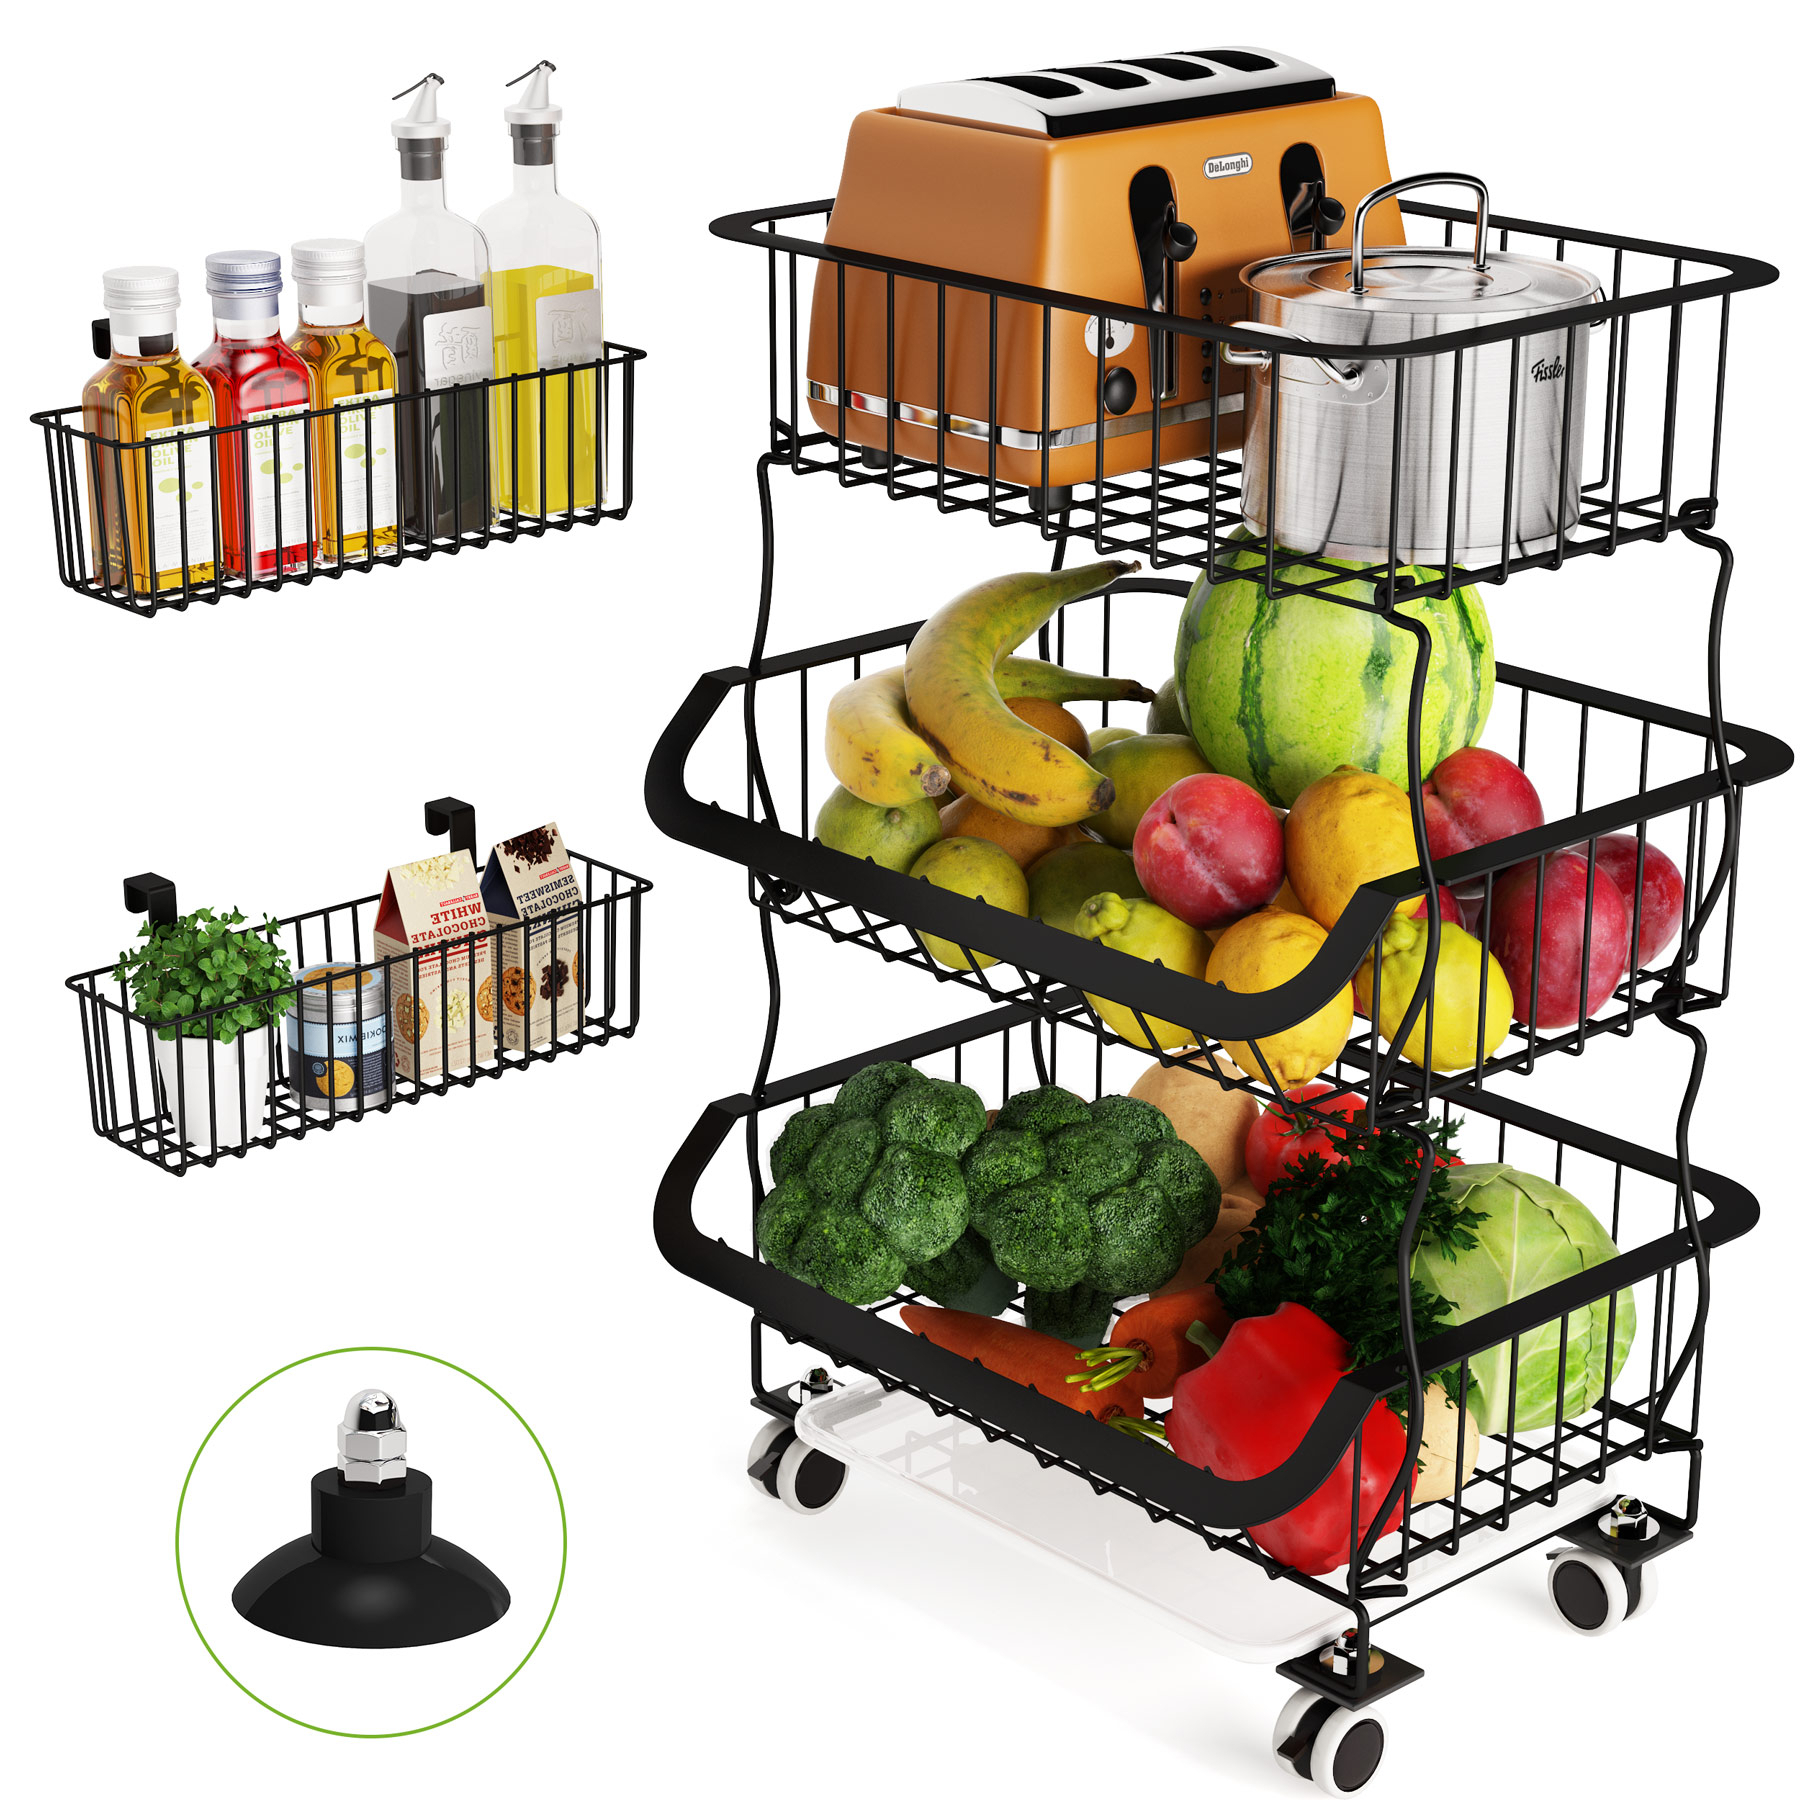 Fruit Basket, 1Easylife 3-Tier 5-Tier Stackable Metal Wire Basket Cart With Rolling Wheels, With 2 Free Basket - 5-Tier